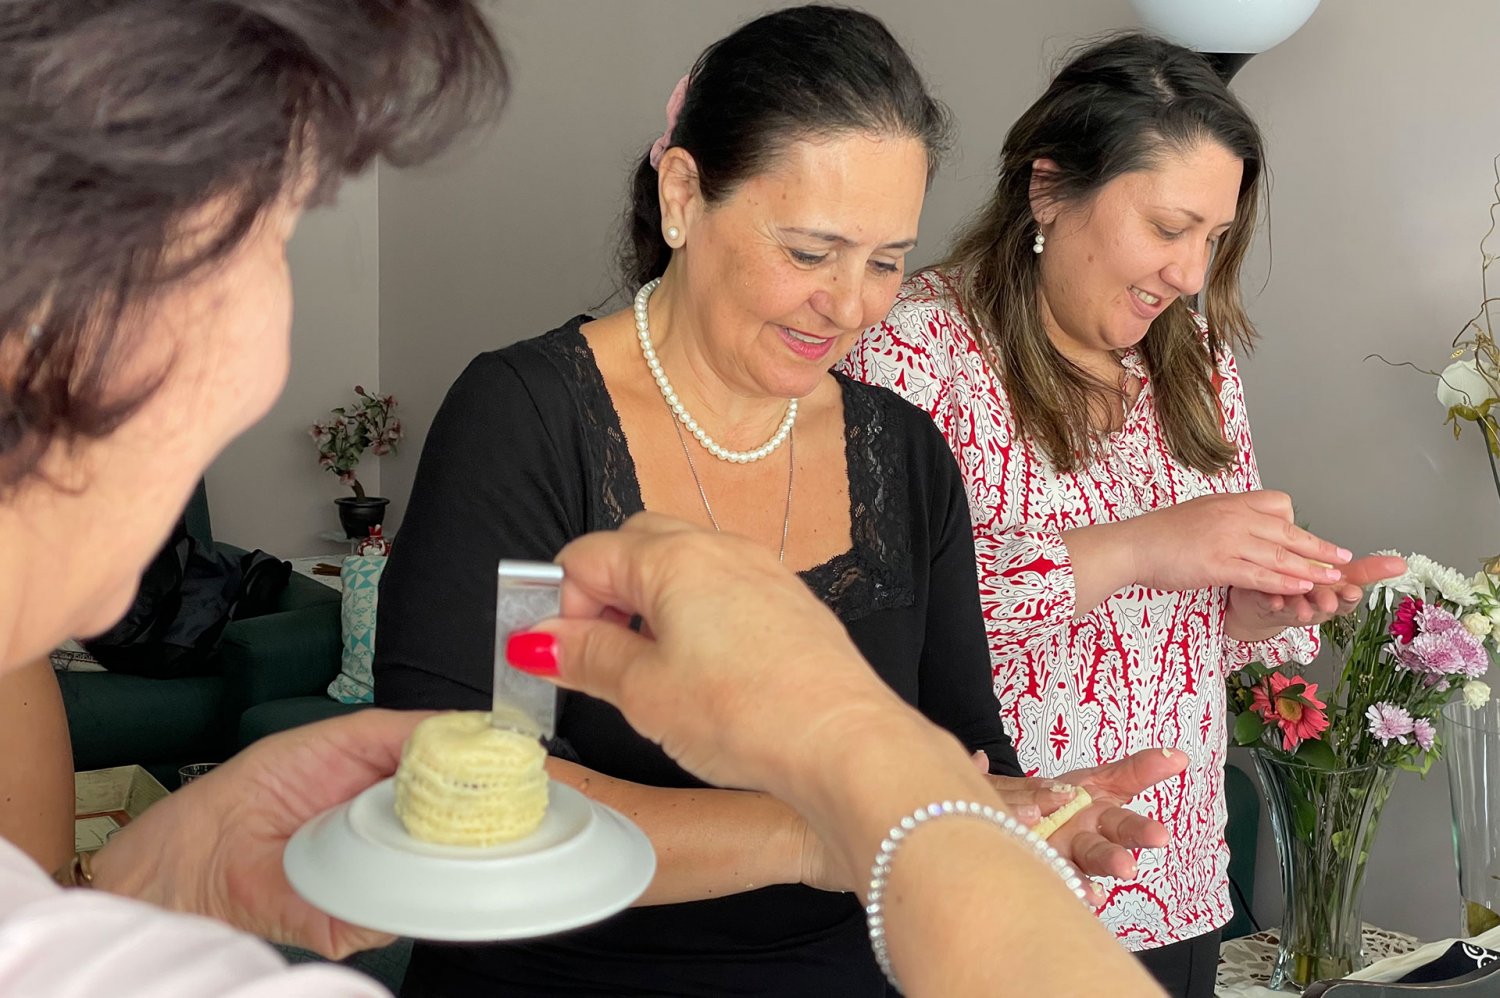 Three Palestinian women shaping and decorating ma'moul Middle Eastern pastries